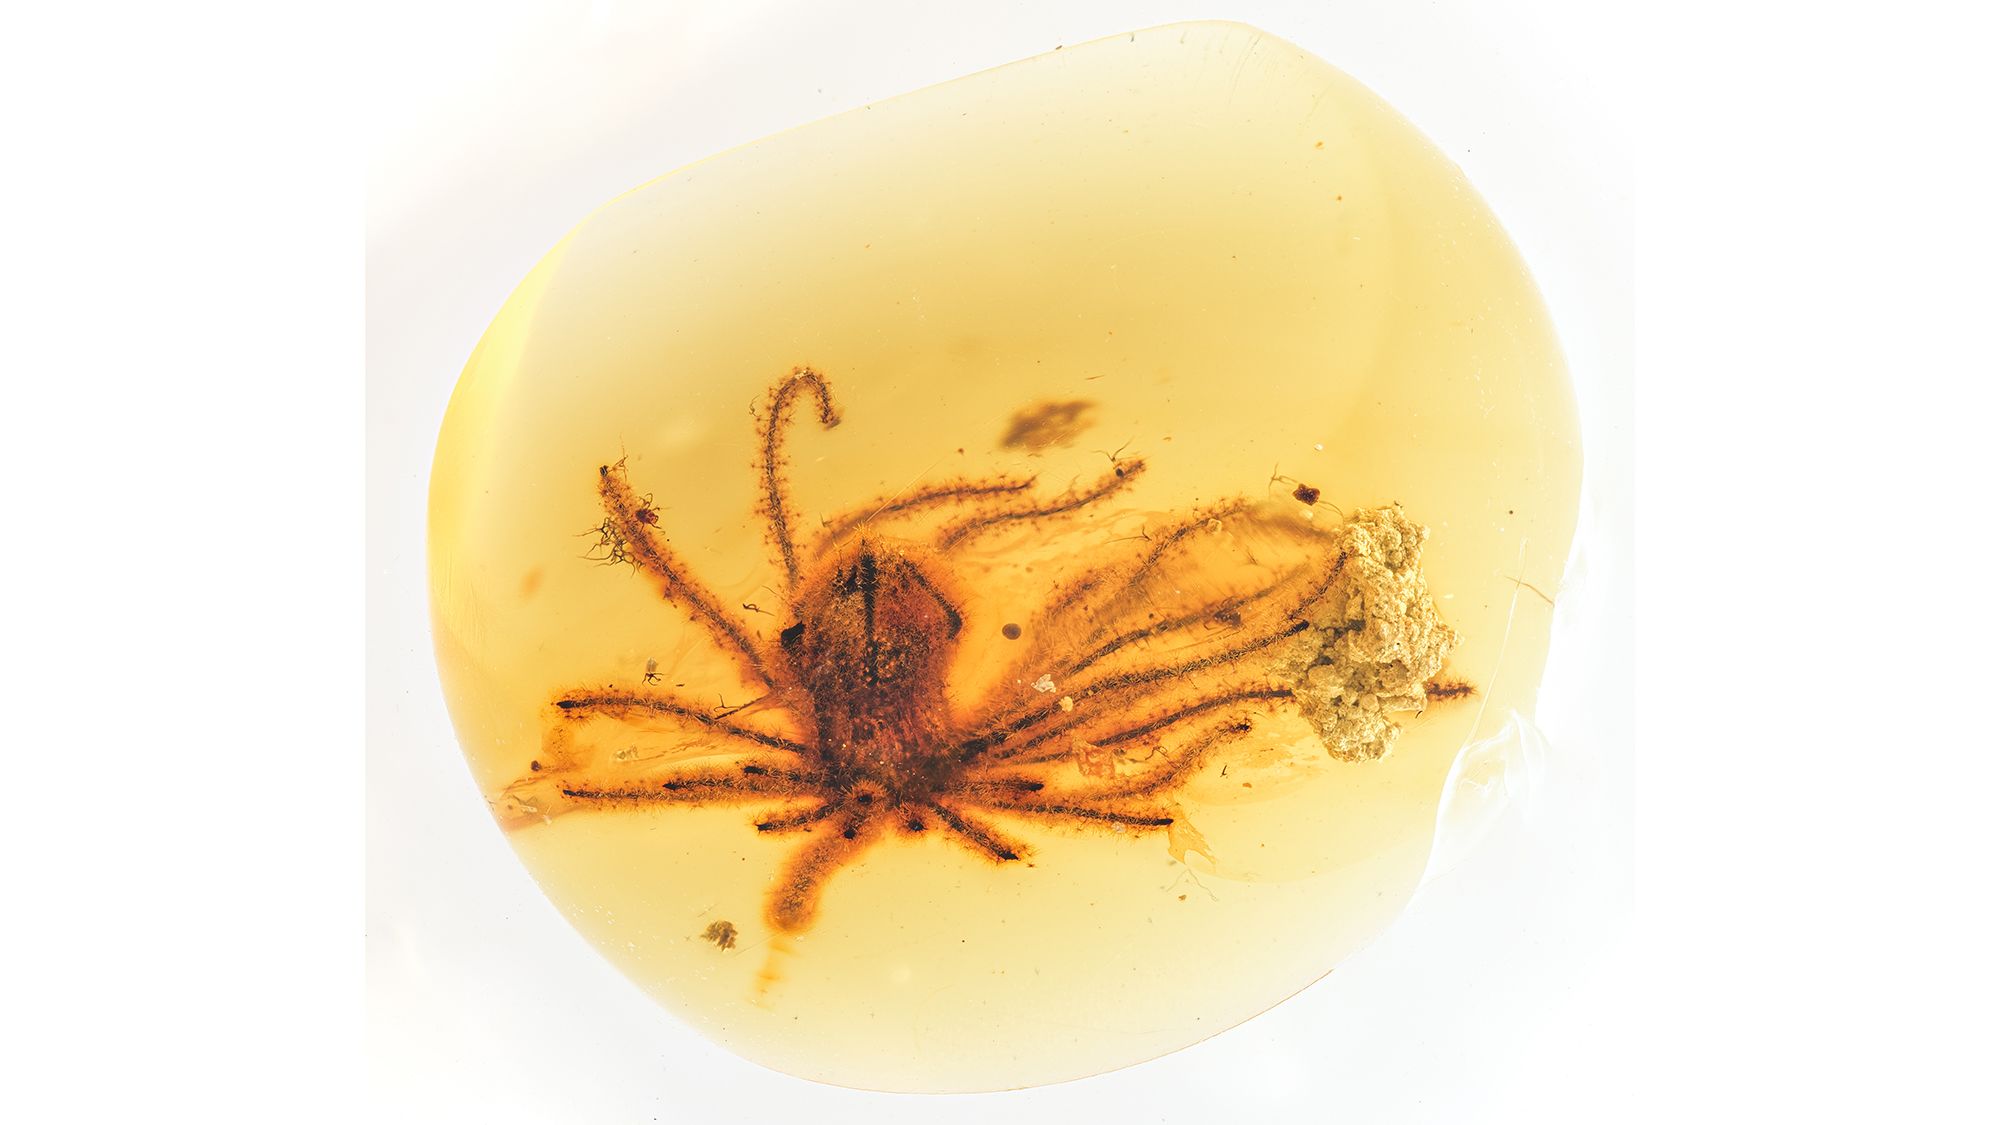 The largest amber-preserved flower revisited